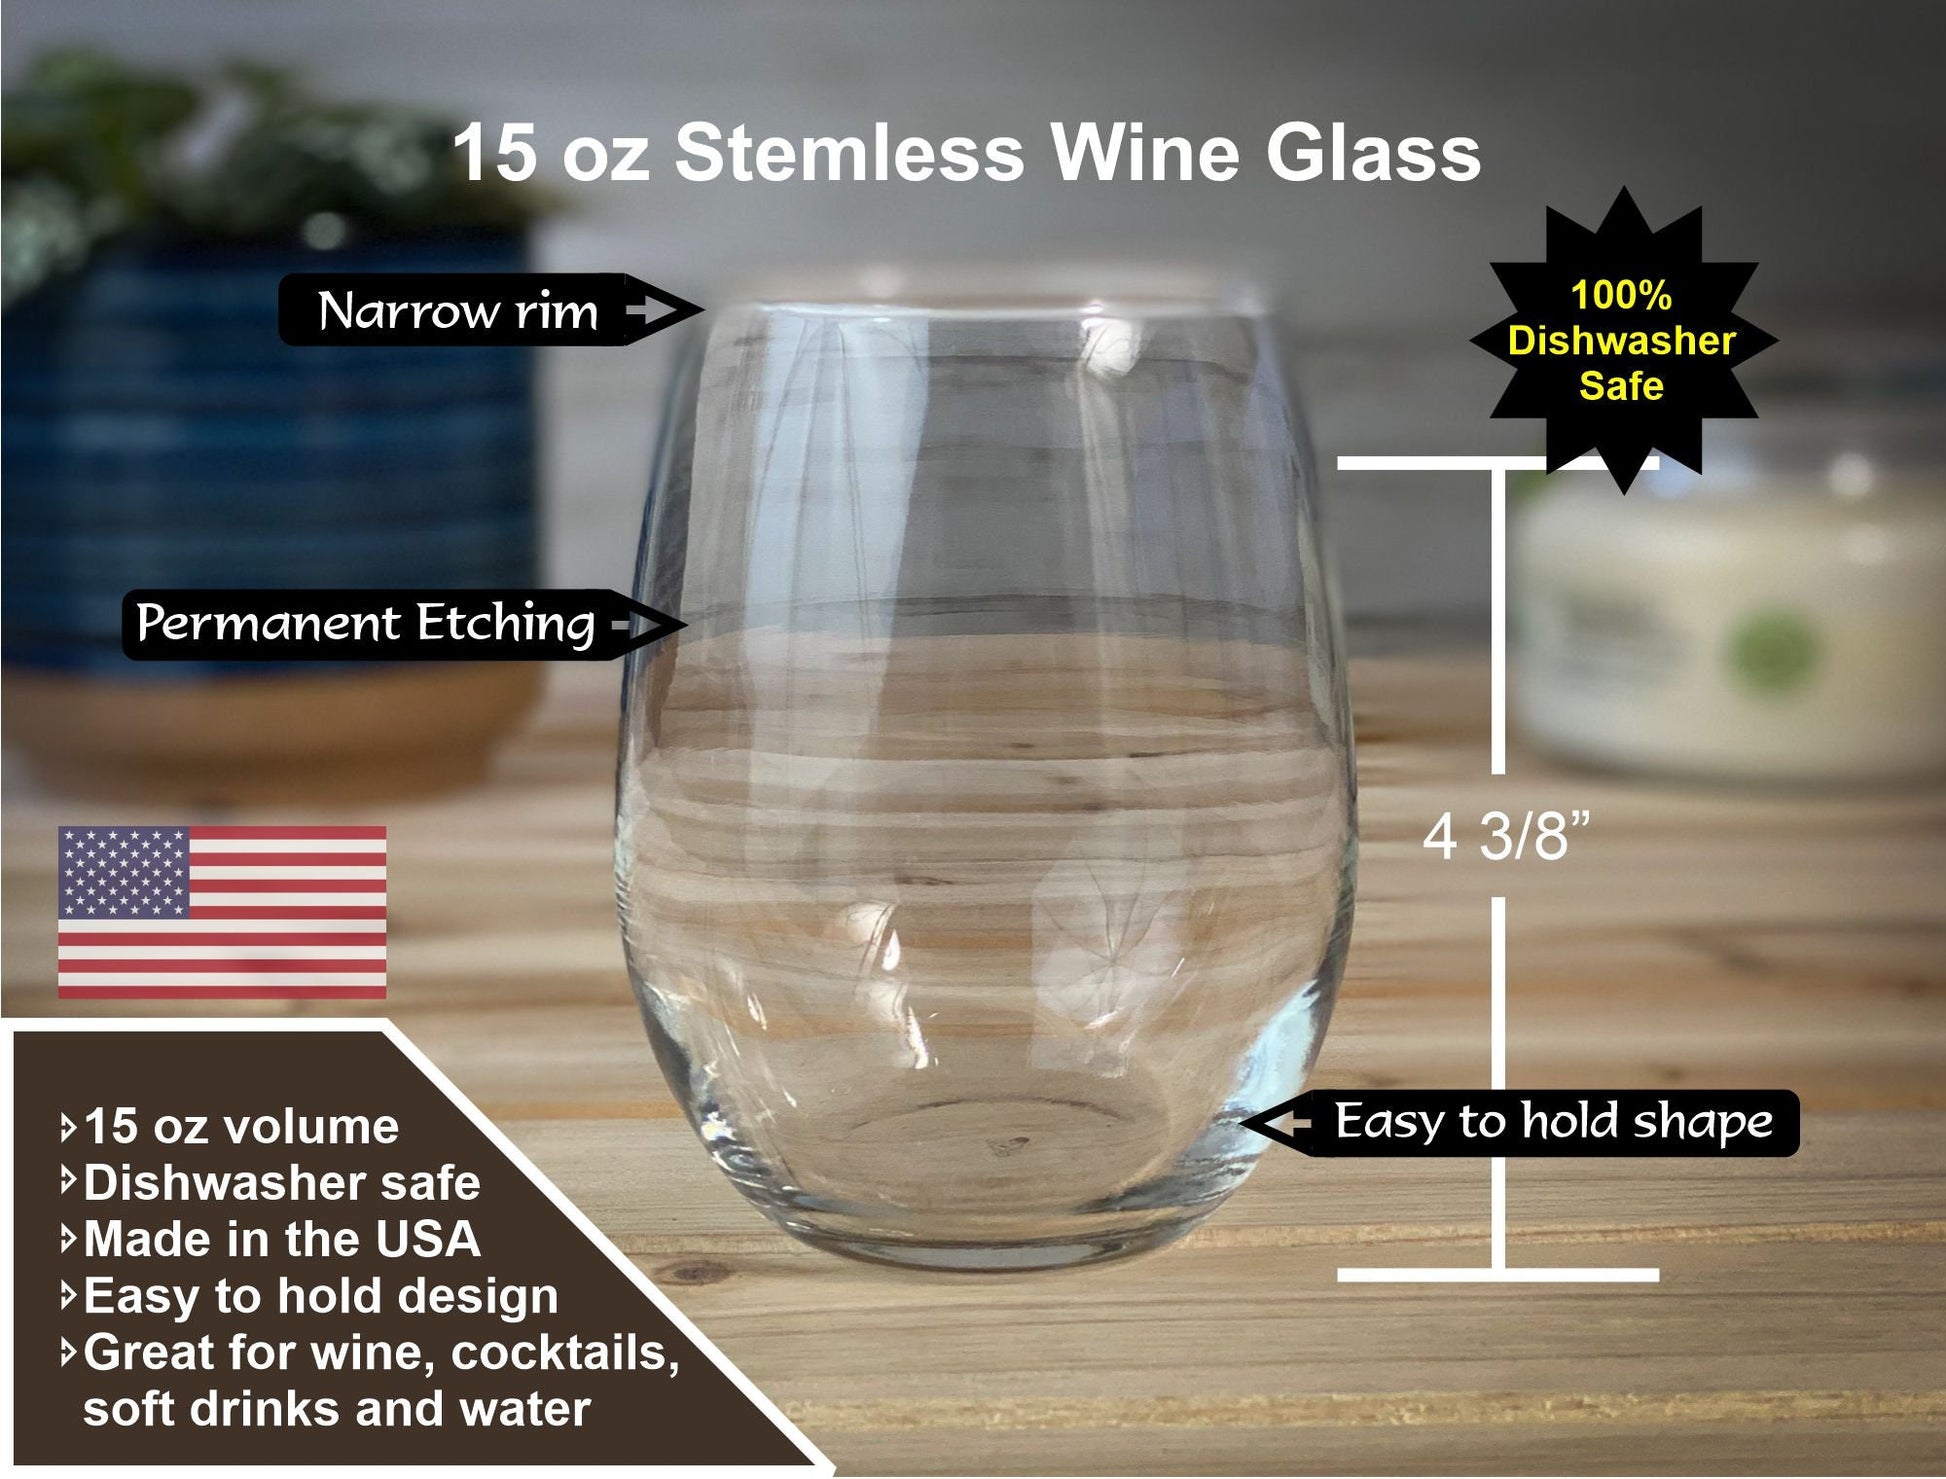 Norris Lake Tennessee - 15 oz Stemless Wine Glass - Lake Life Gift